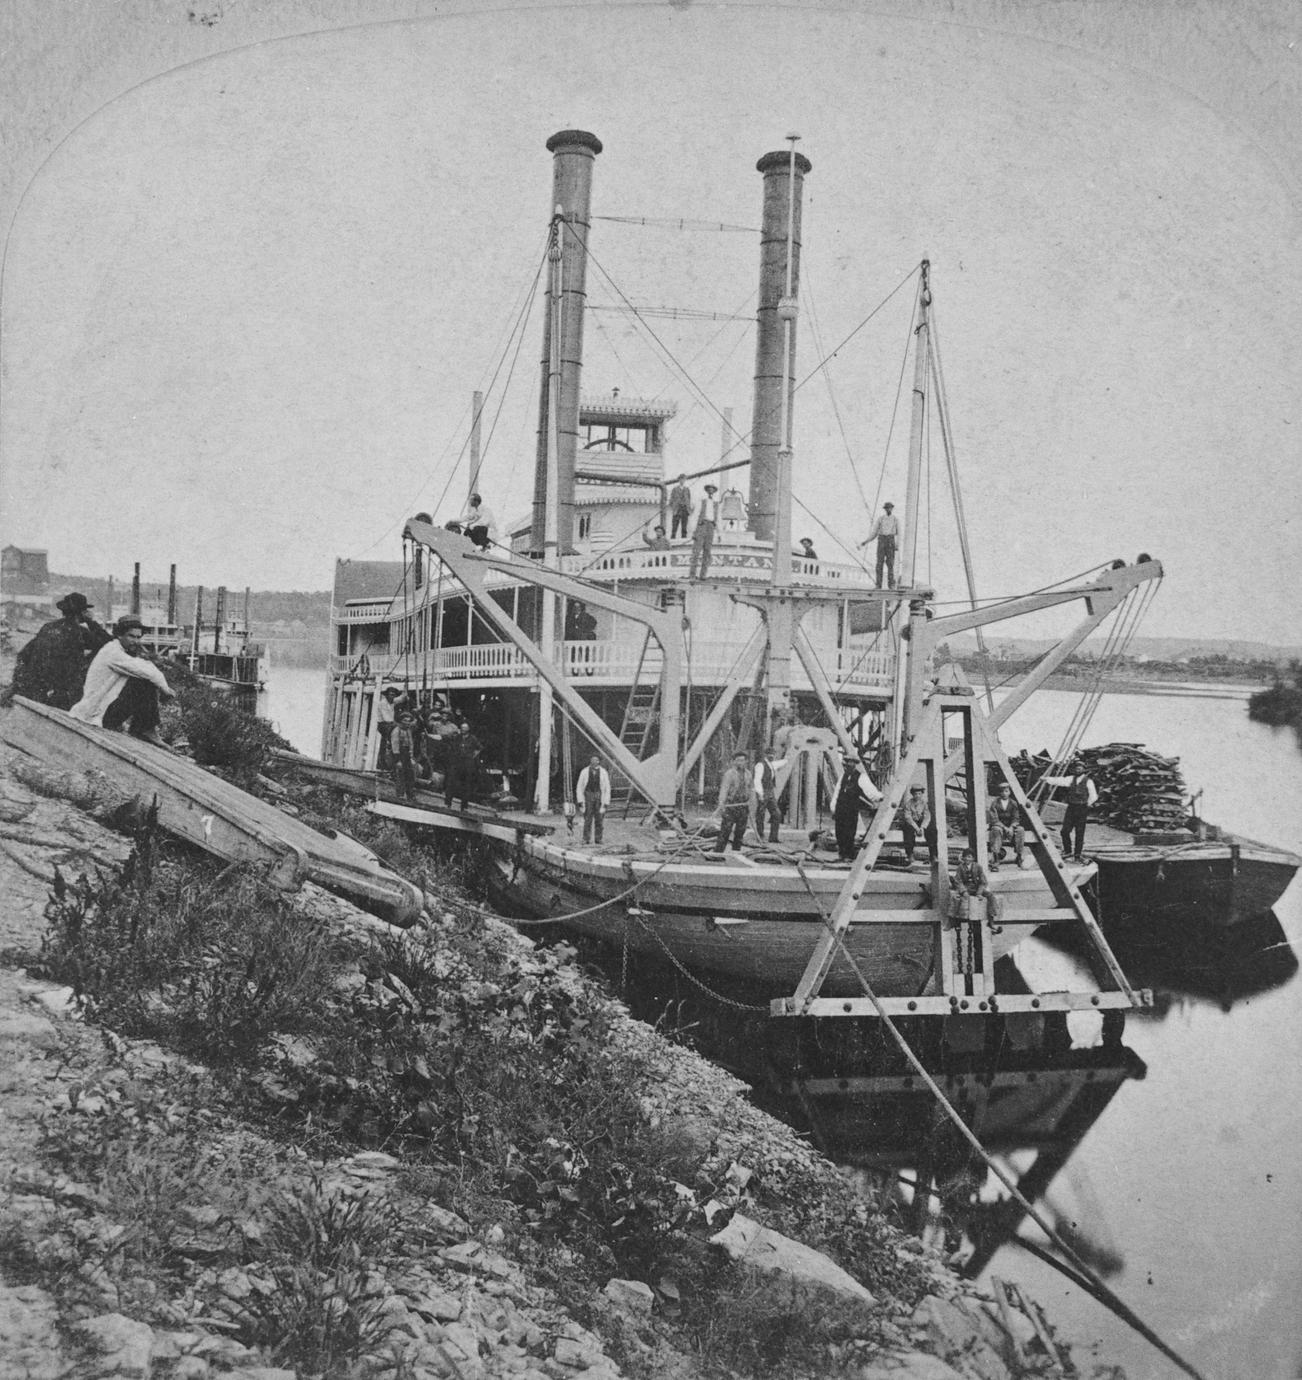 Montana (Packet/Snagboat, 1864-1879)